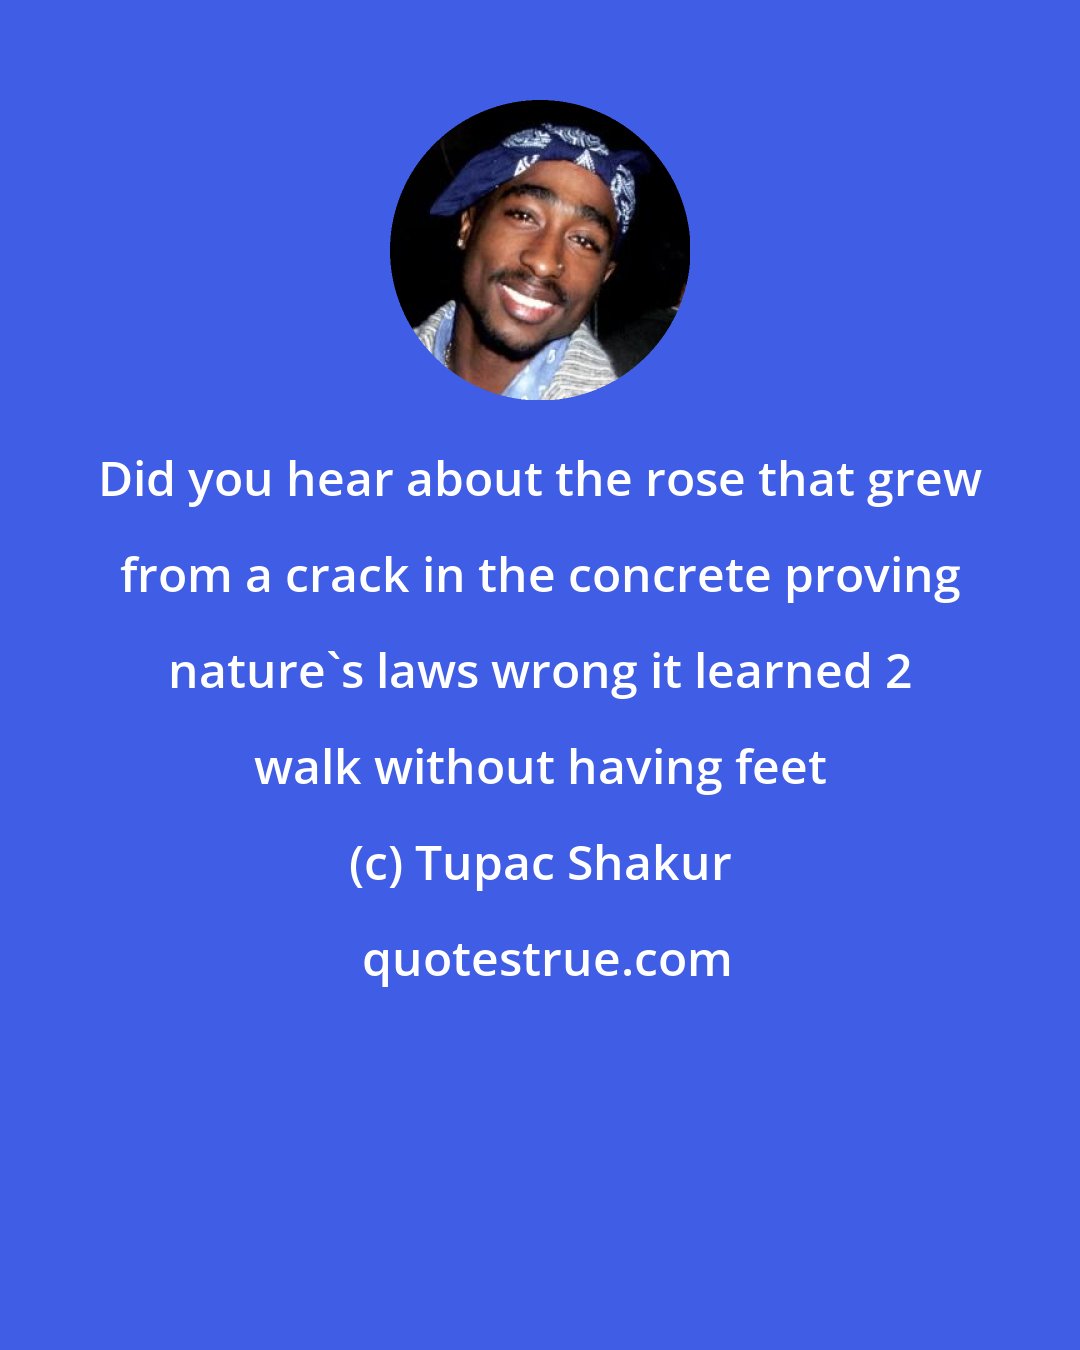 Tupac Shakur: Did you hear about the rose that grew from a crack in the concrete proving nature's laws wrong it learned 2 walk without having feet